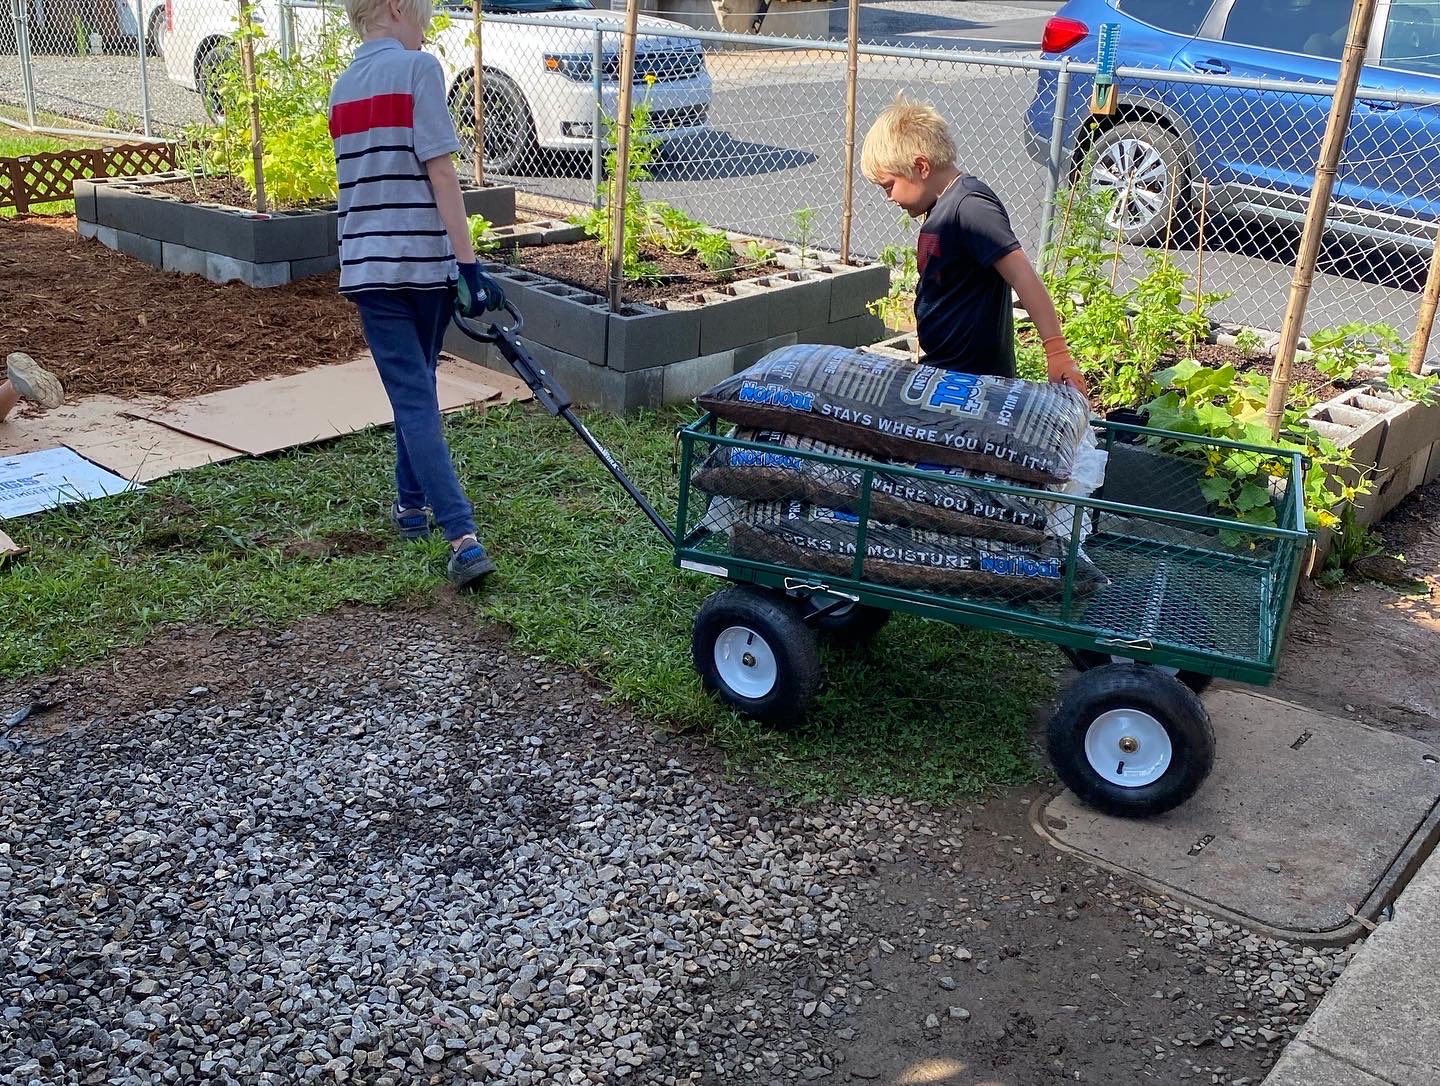 Children pull a wagon containing bags of mulch.